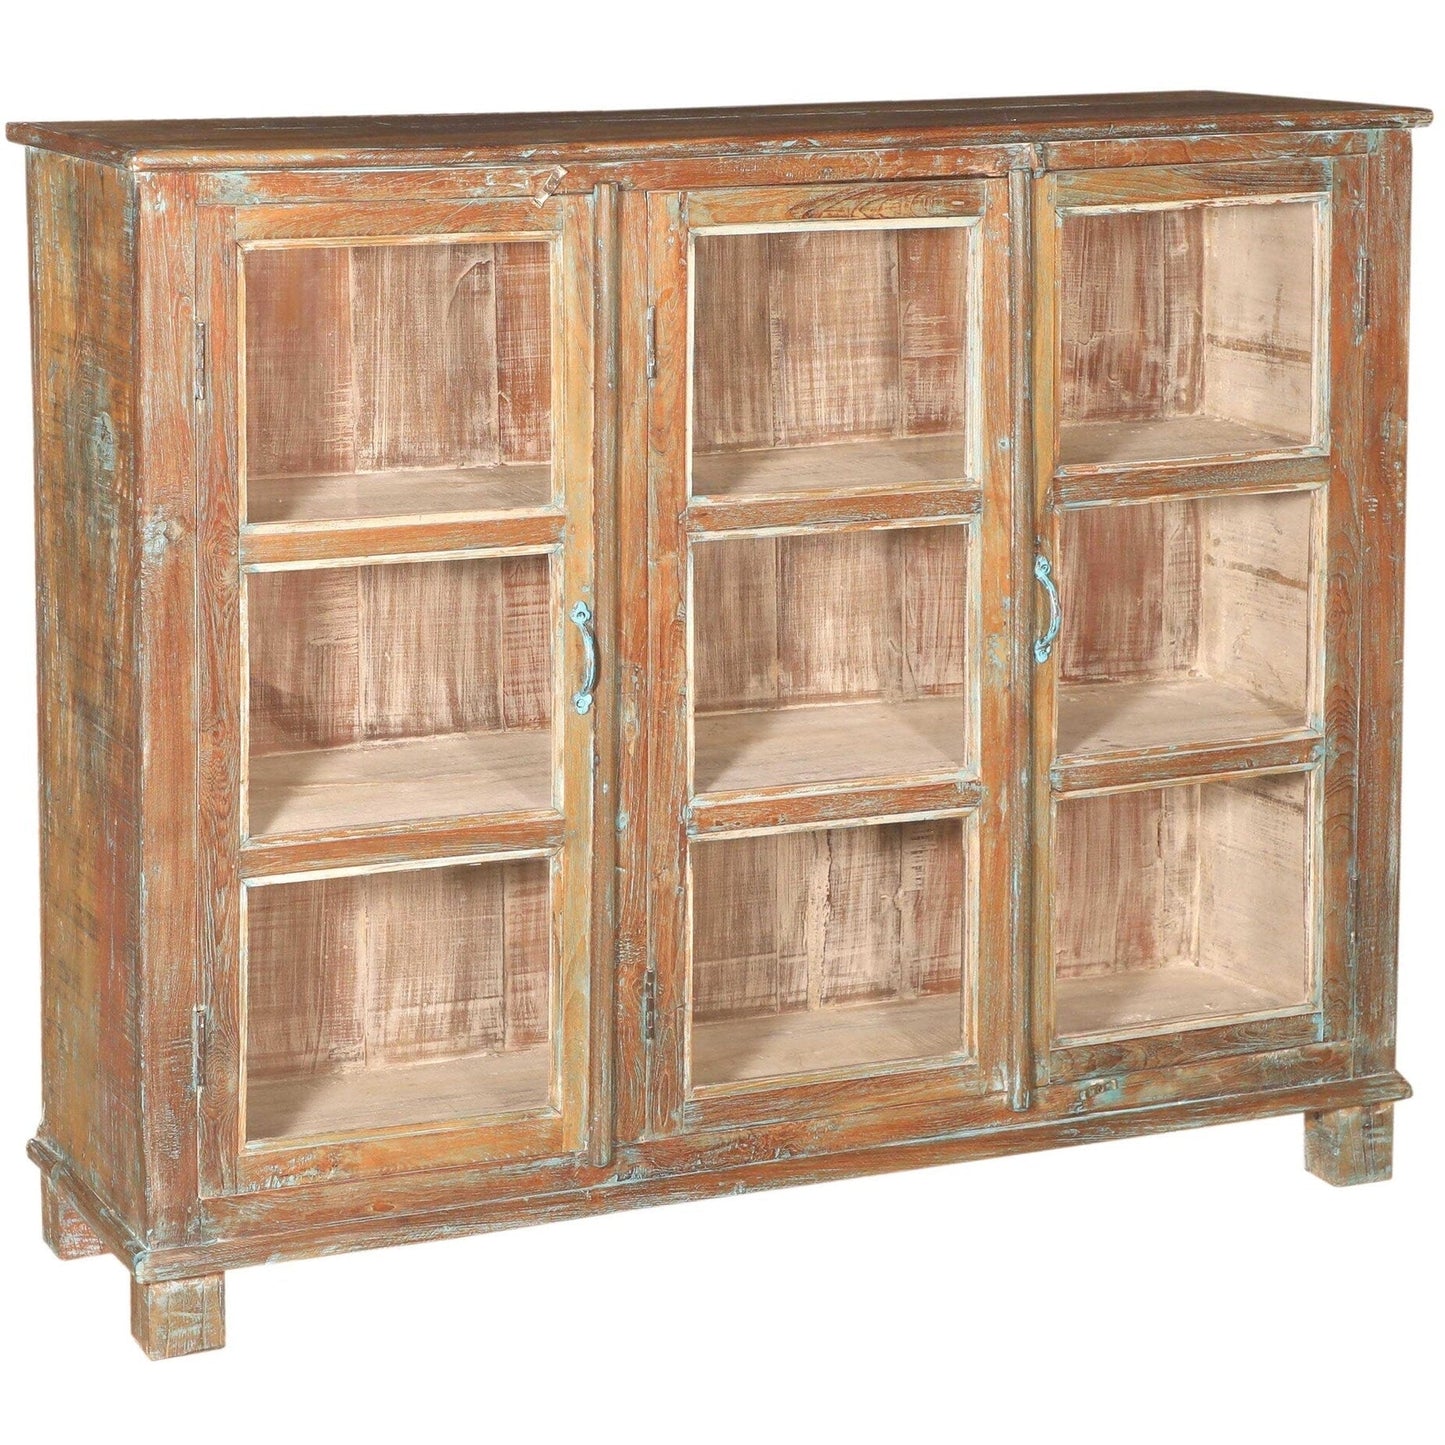 RM-056261, Wooden Cabinet With Glass